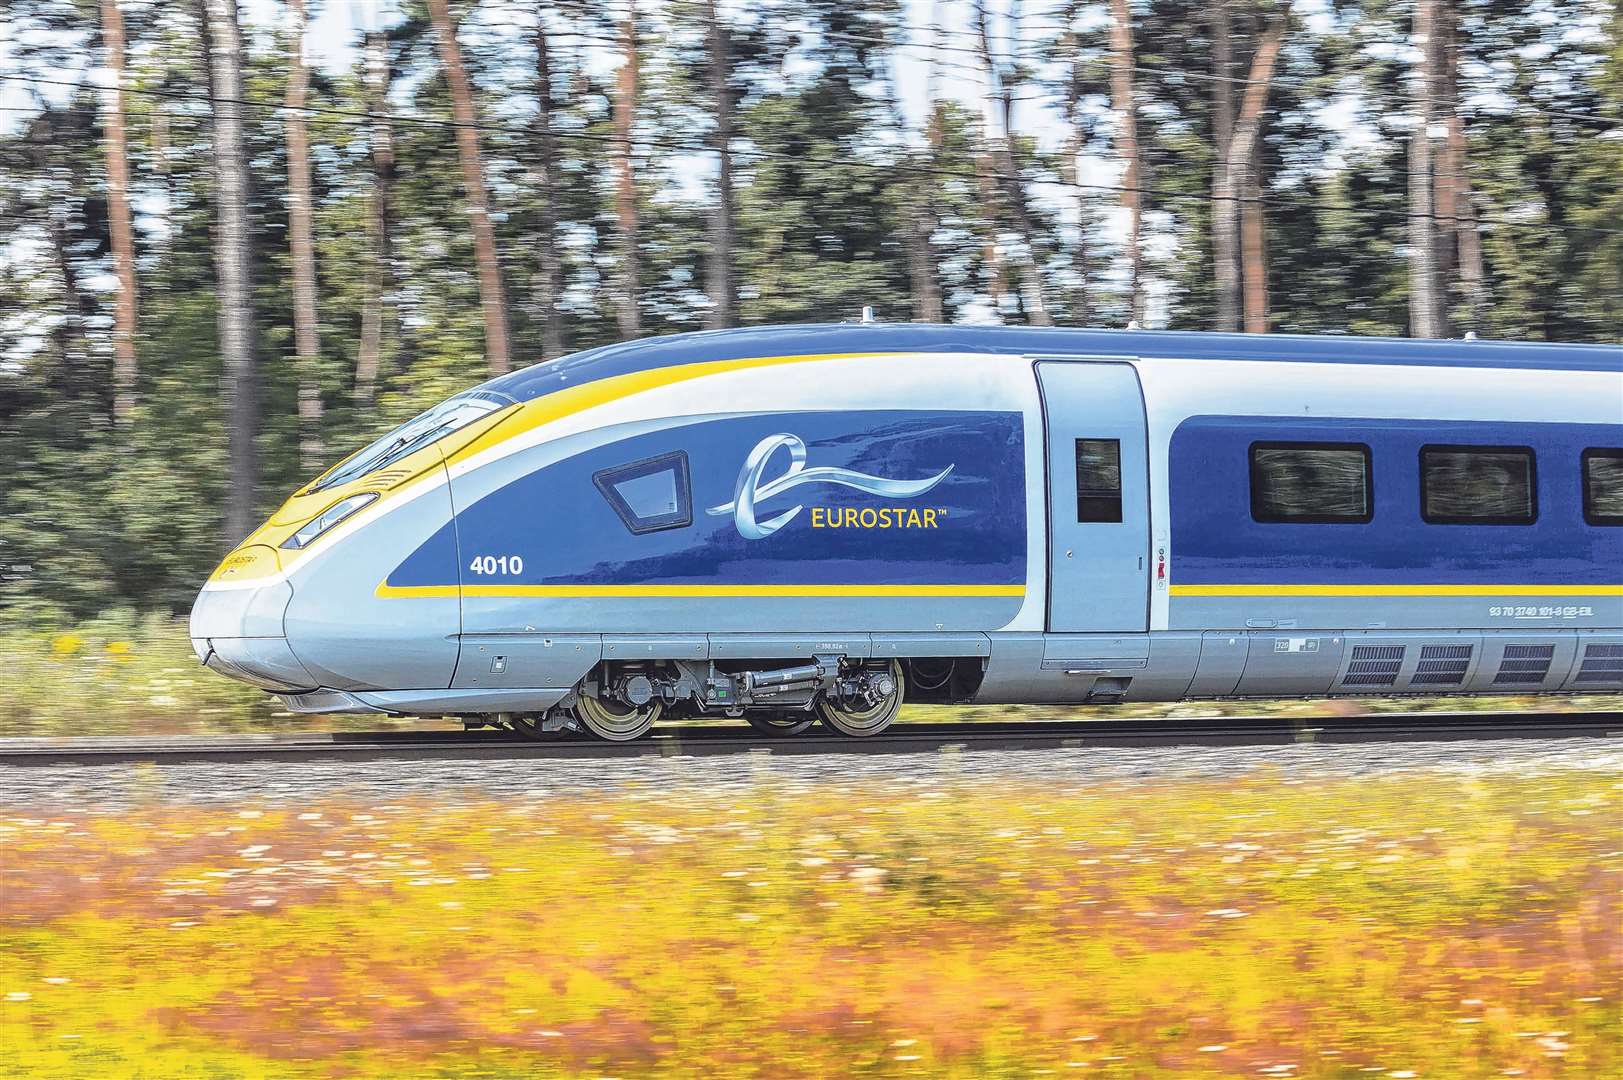 Eurostar has seen traveller figures plunge 95% since the pandemic ushered in travel restrictions